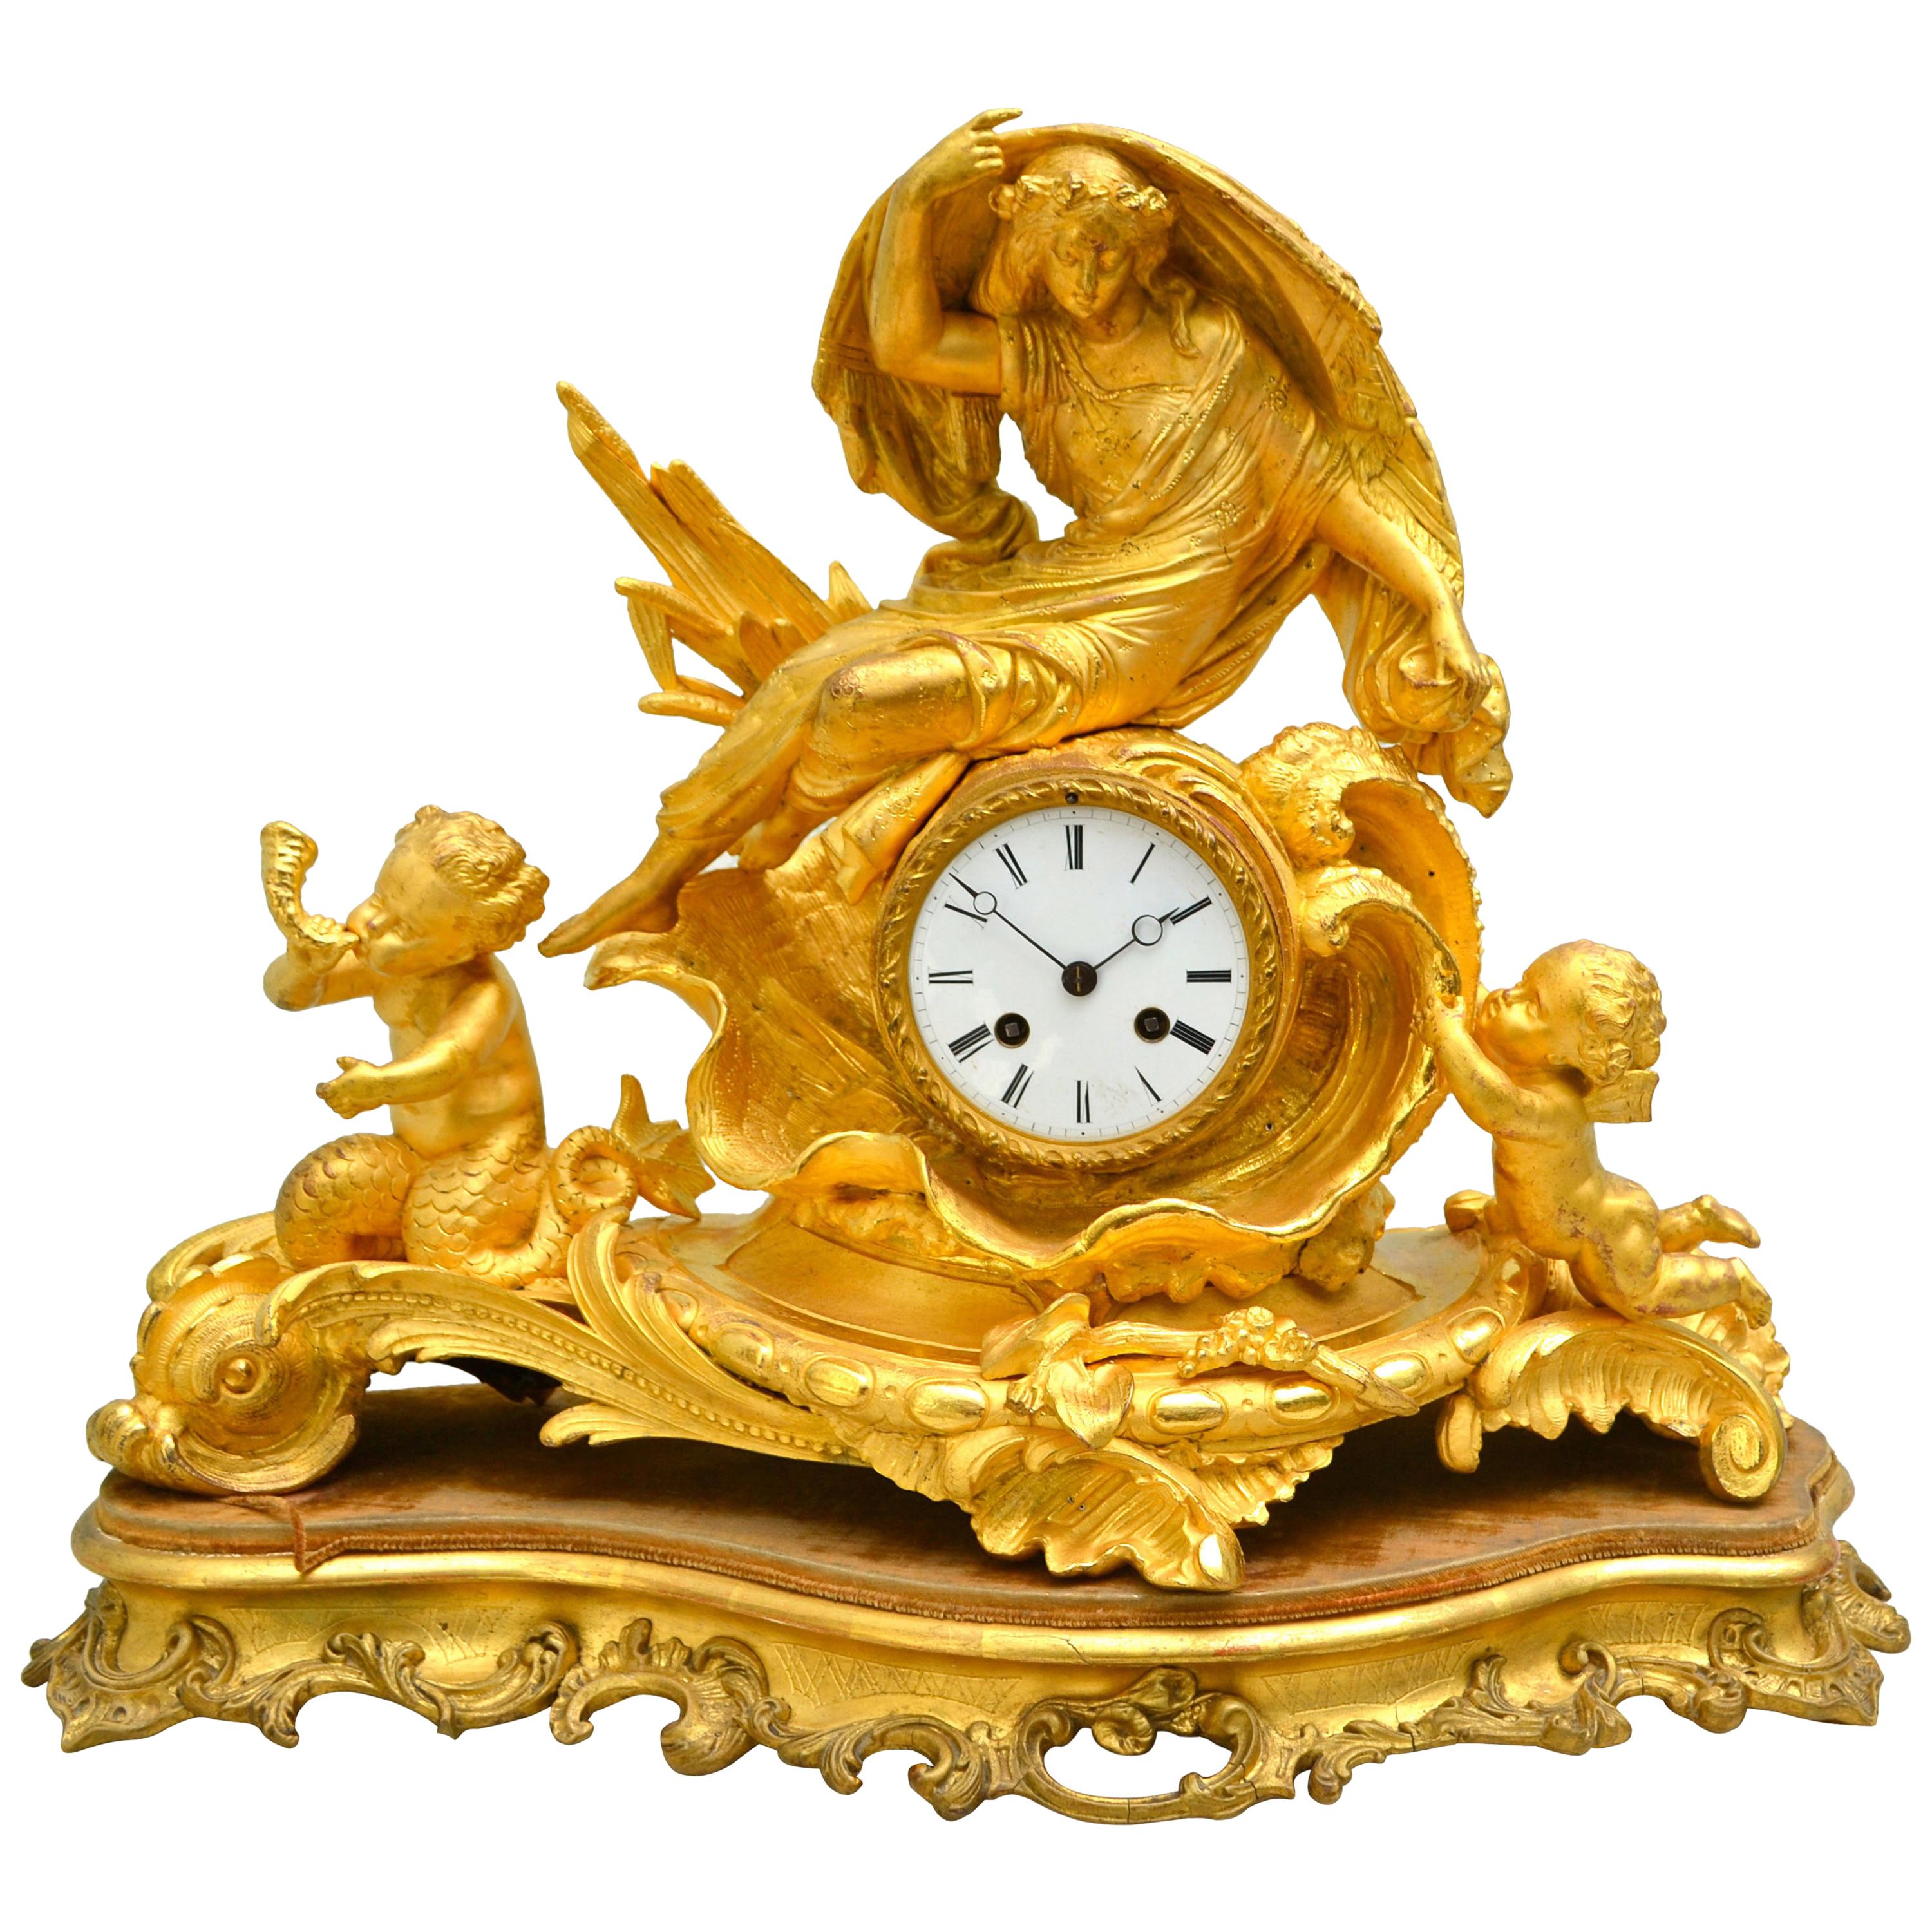 Allegorical Rococo Revival Clock Depicting a Gilt Water Sprite with Putti